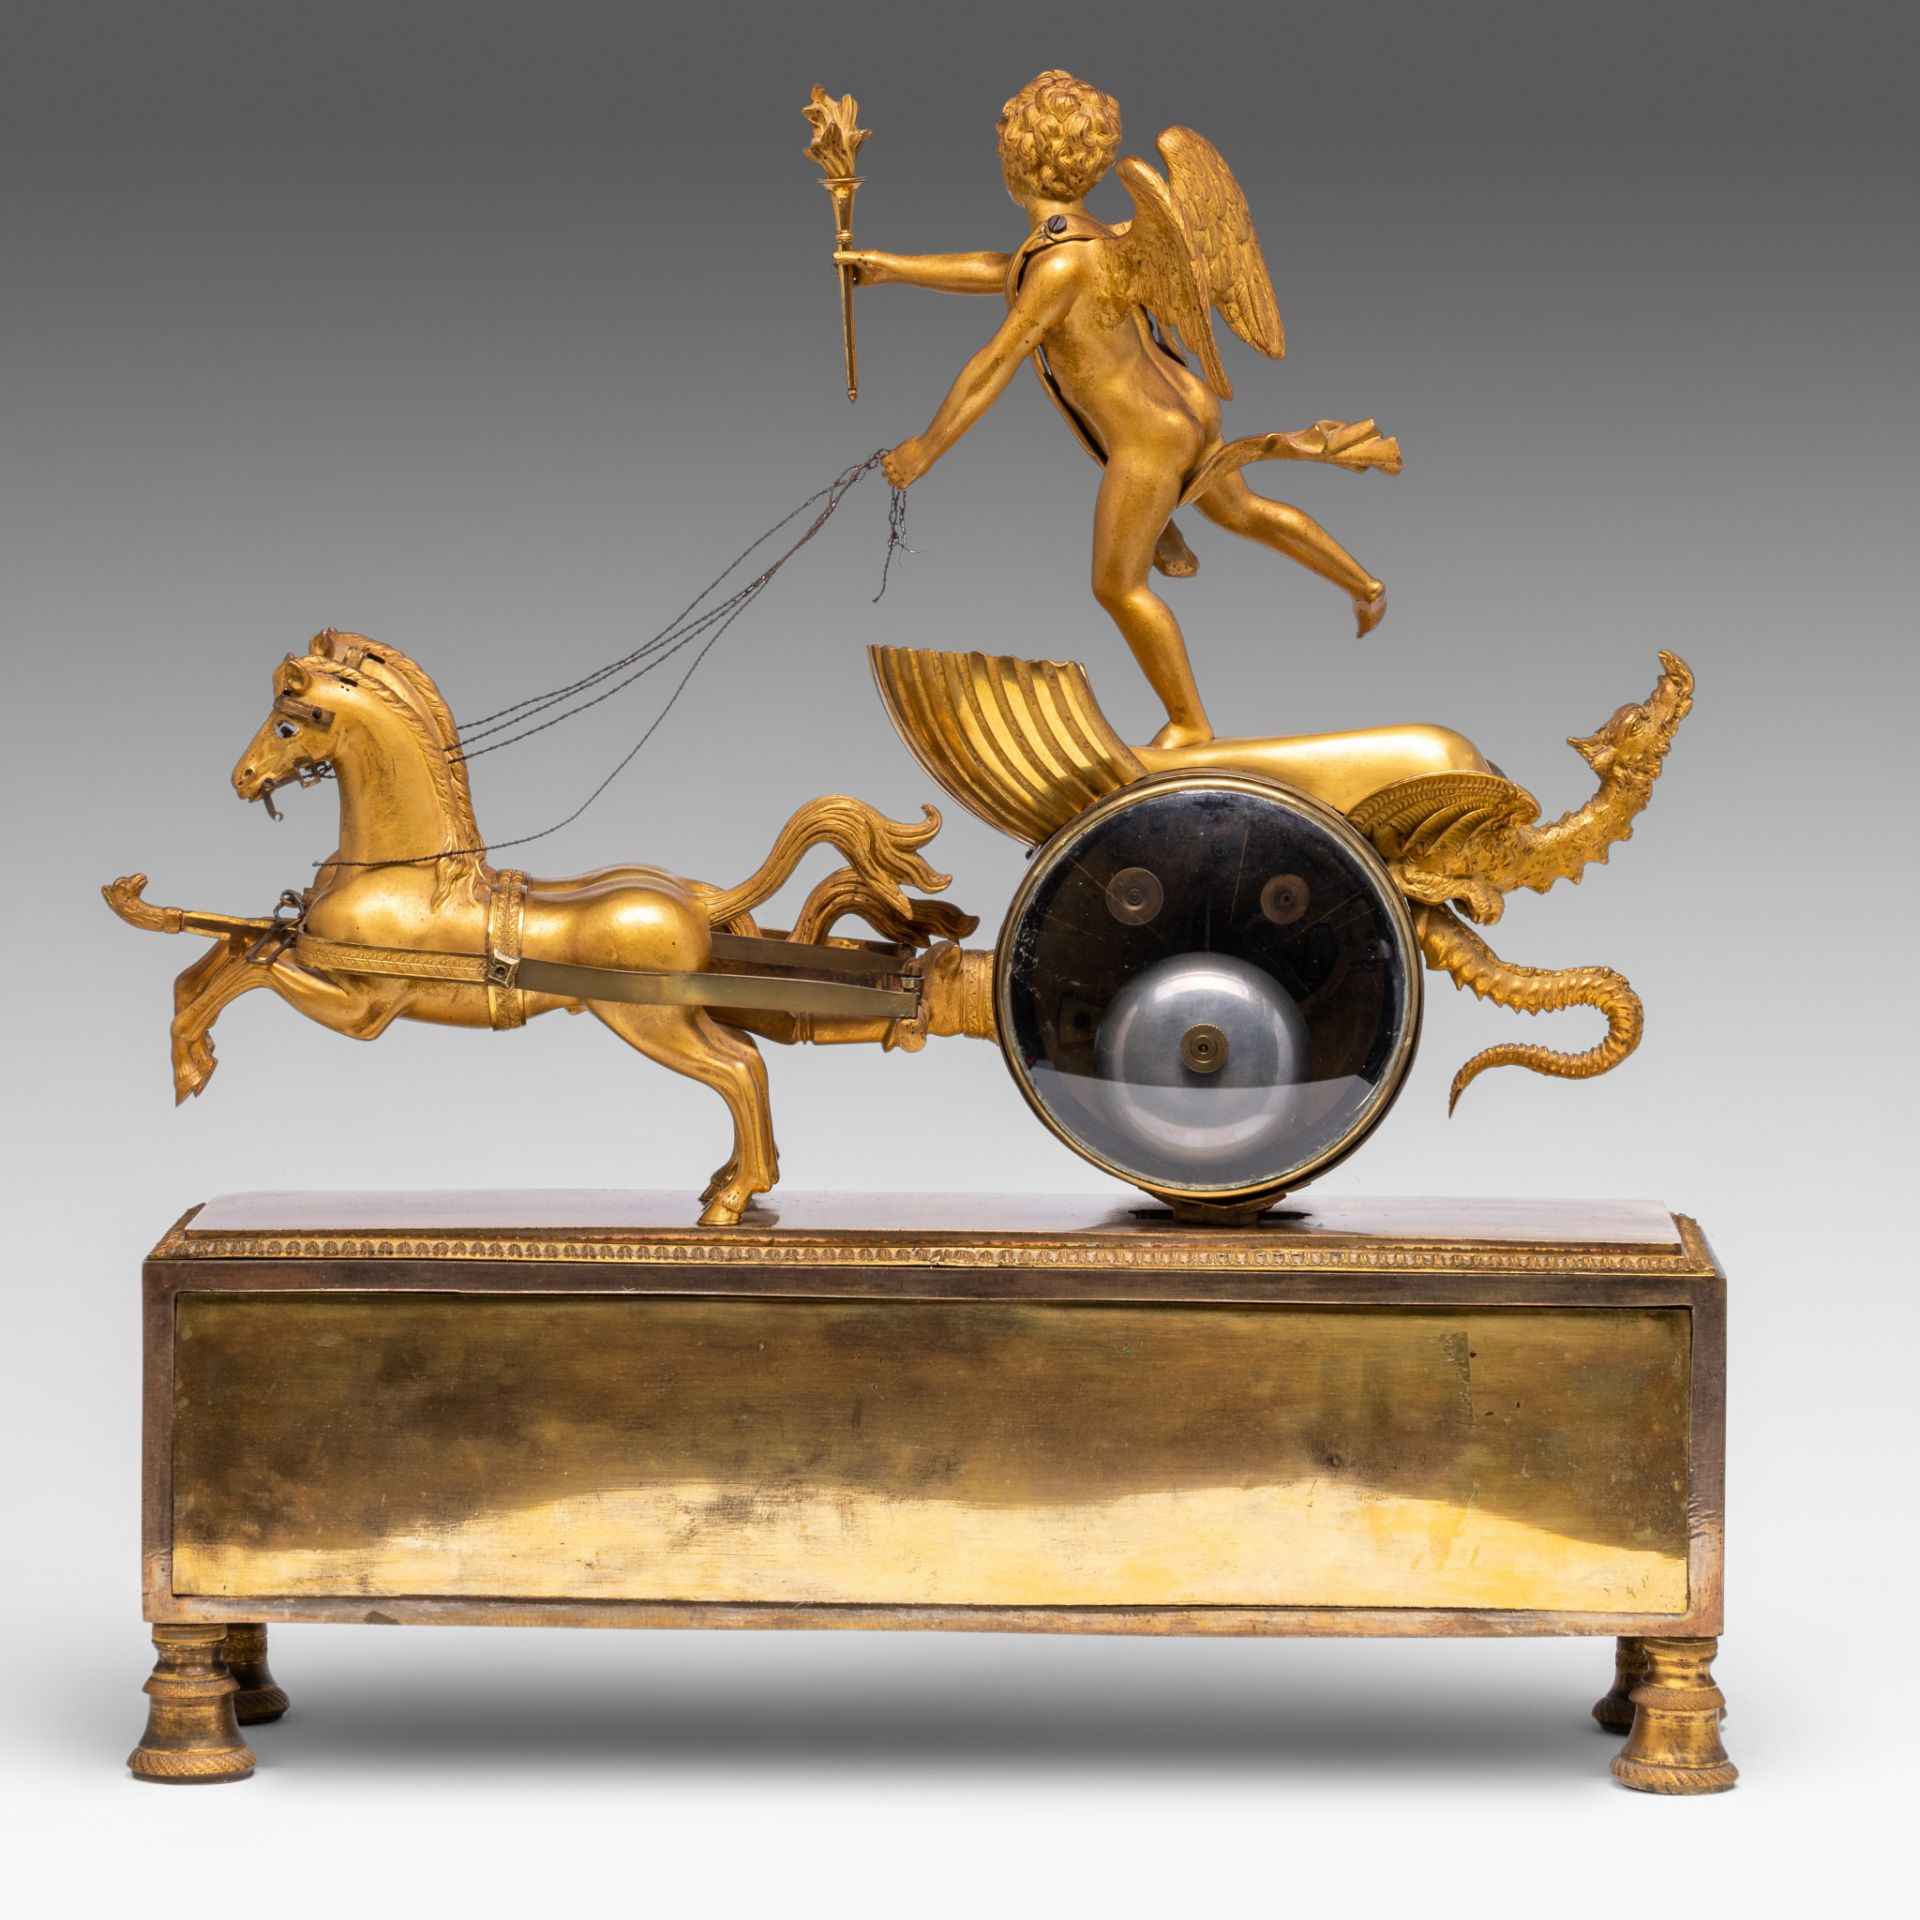 A fine Empire gilt bronze mantle clock of Cupid's chariot, ca. 1810, H 49 - W 46,5 cm - Image 4 of 6